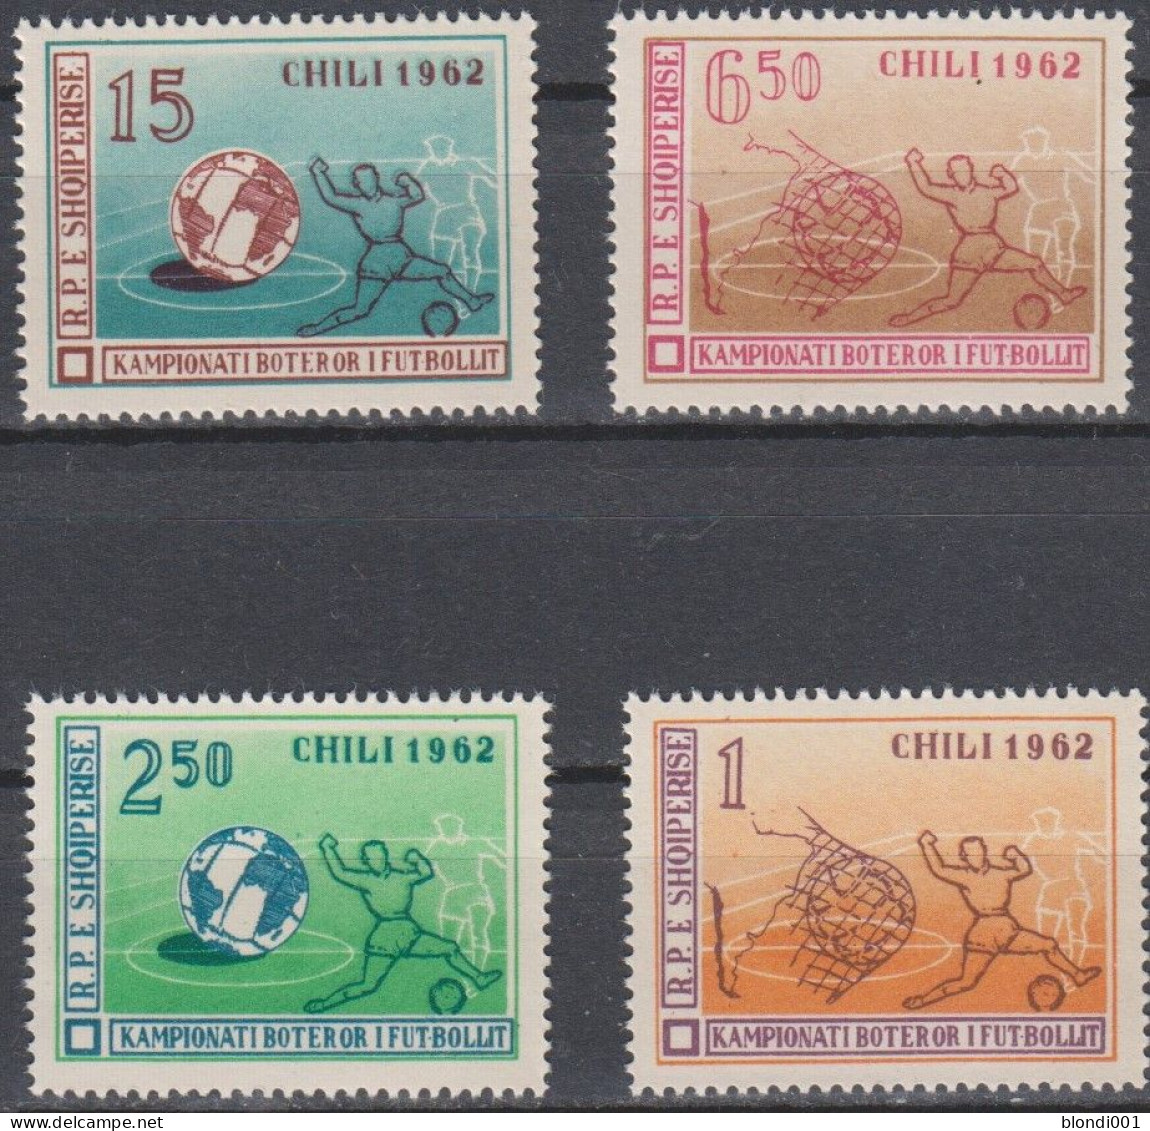 Soccer World Cup 1962 - Football - ALBANIA - Set Perf. MNH - 1962 – Chile